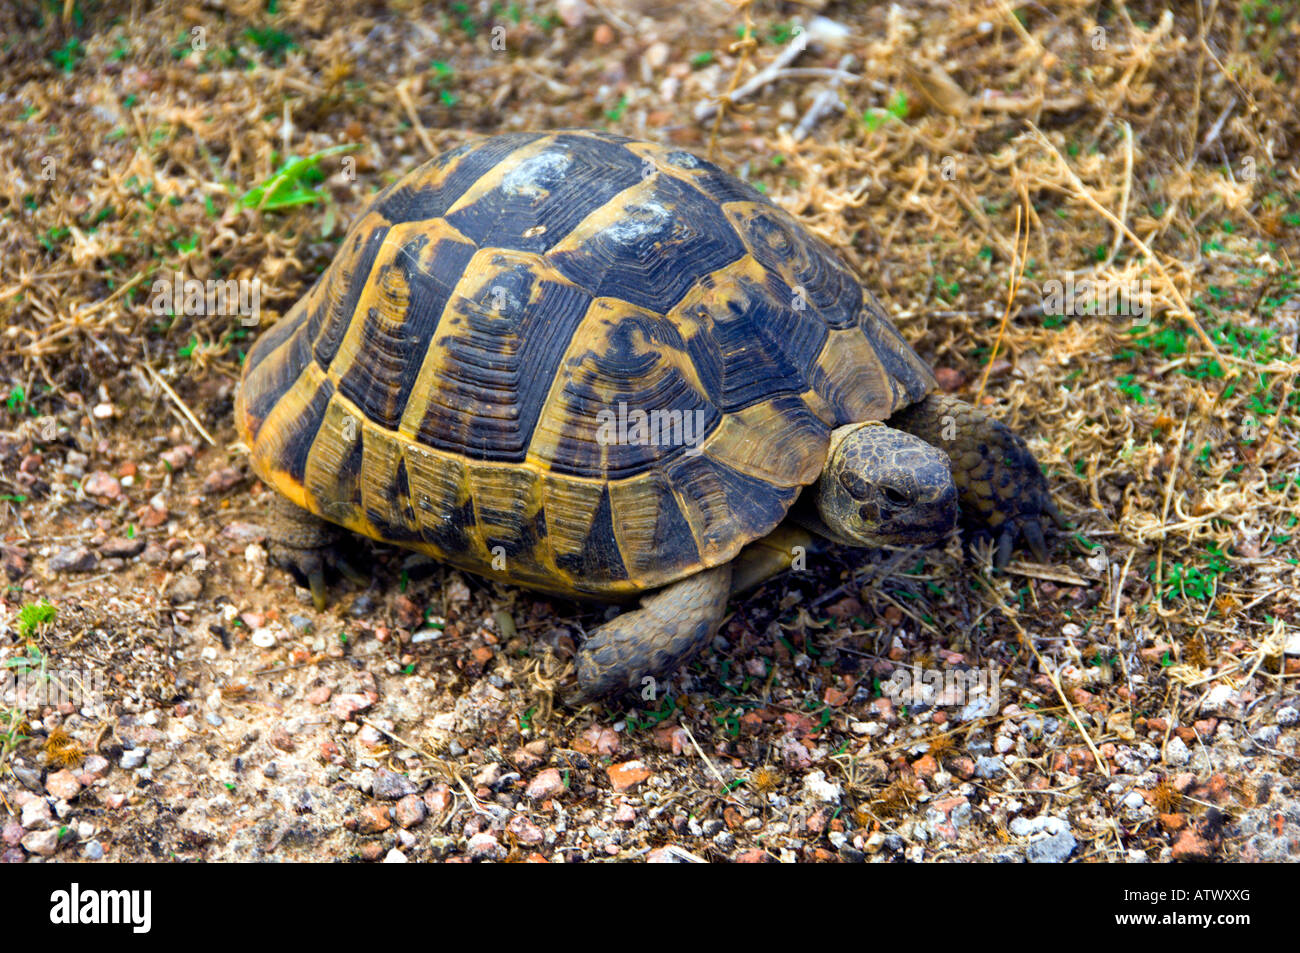 A large turtle exploring the ruins of ancient Phillipi Greece Stock Photo